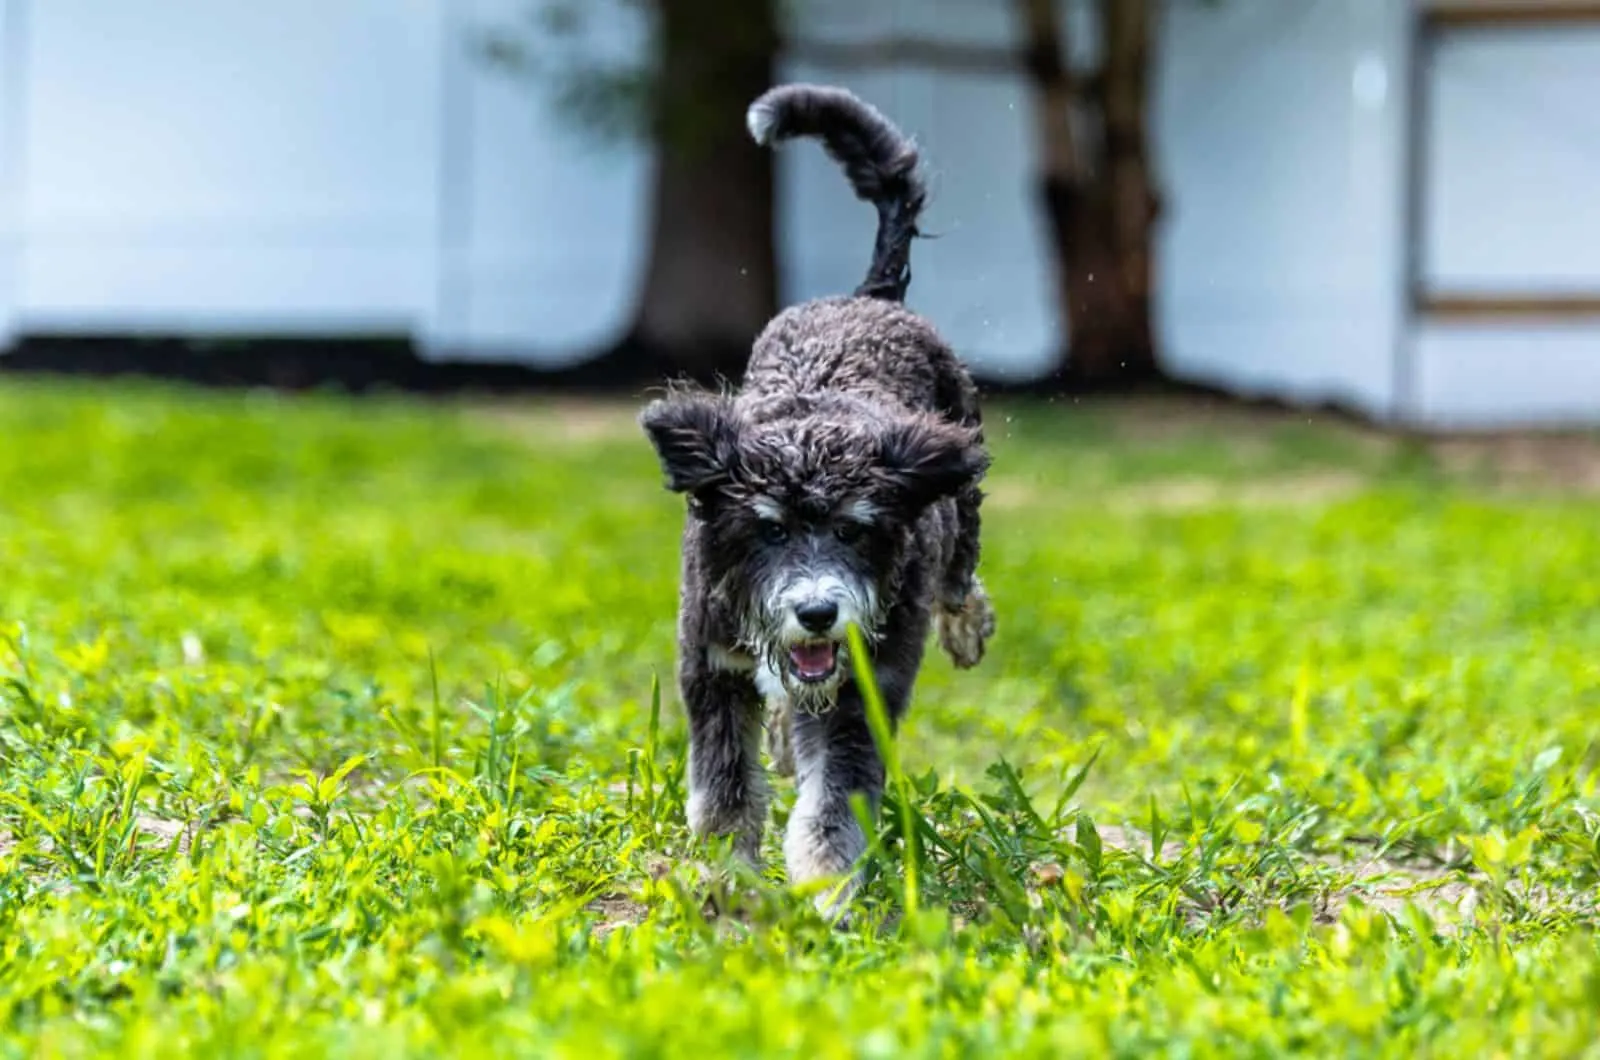 bernedoodle puppy running on the grass in the yard